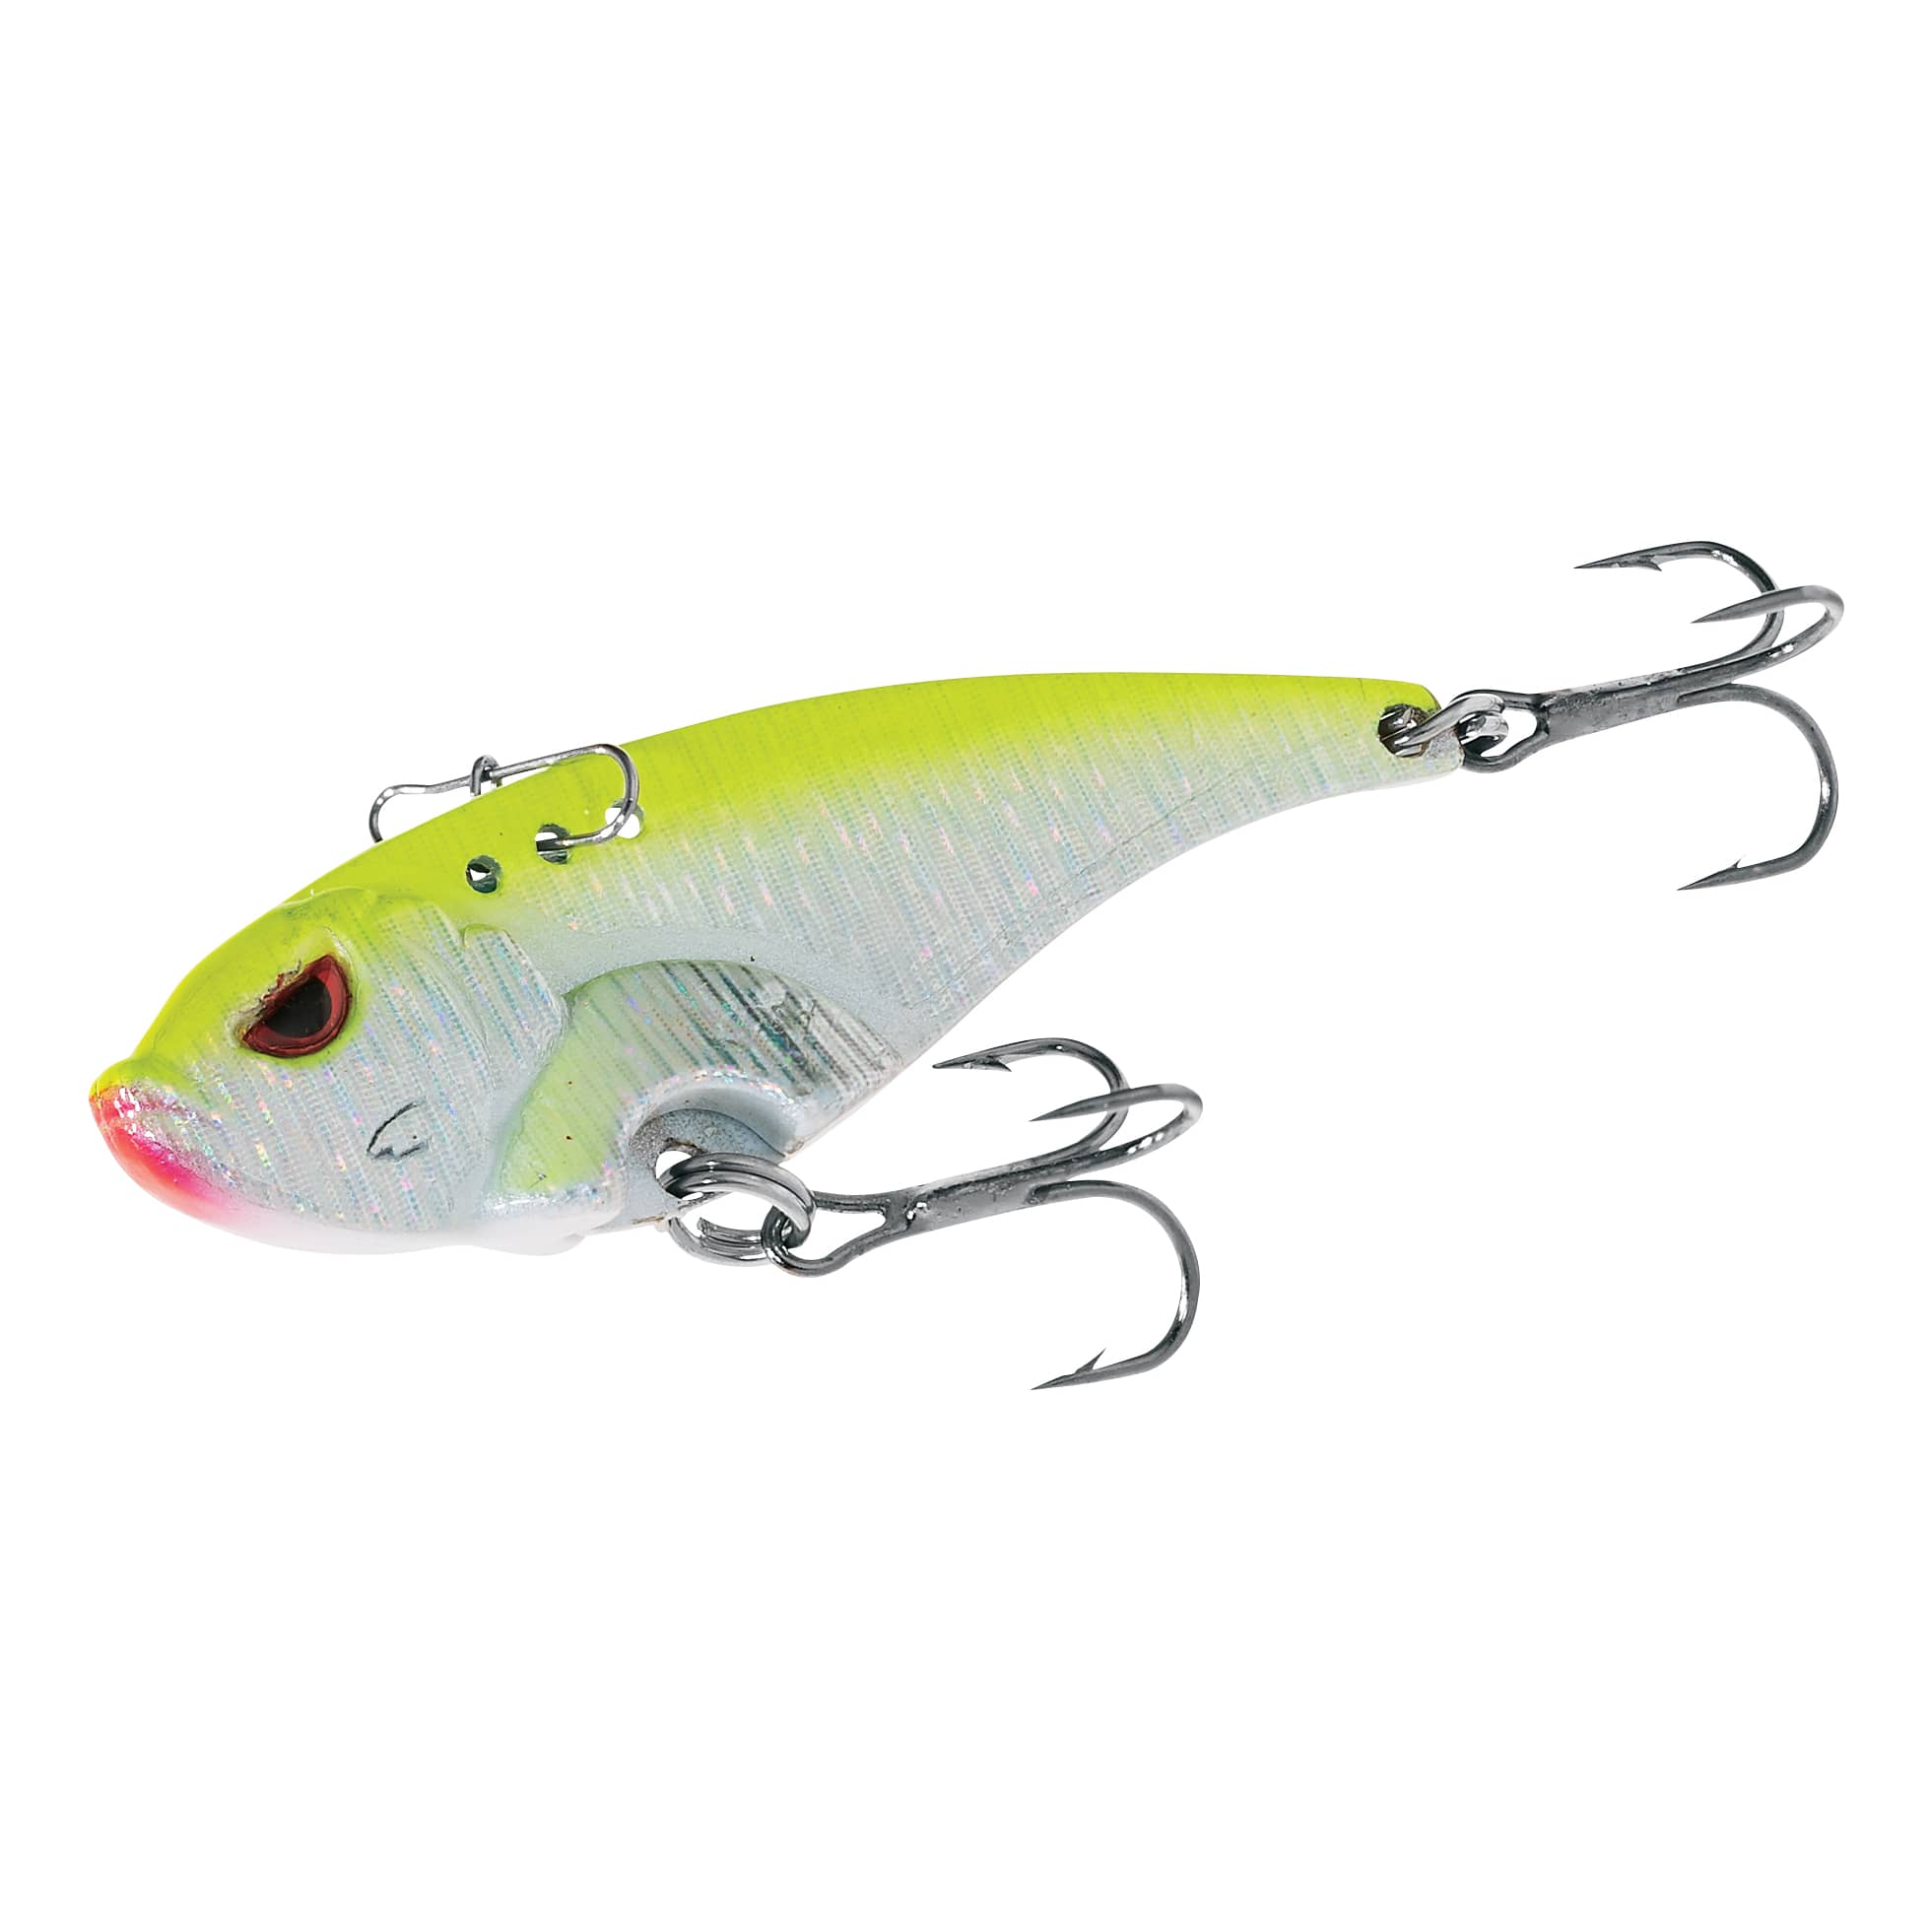 Cabela's Mean Eye Blade Bait - Chartreuse/Silver